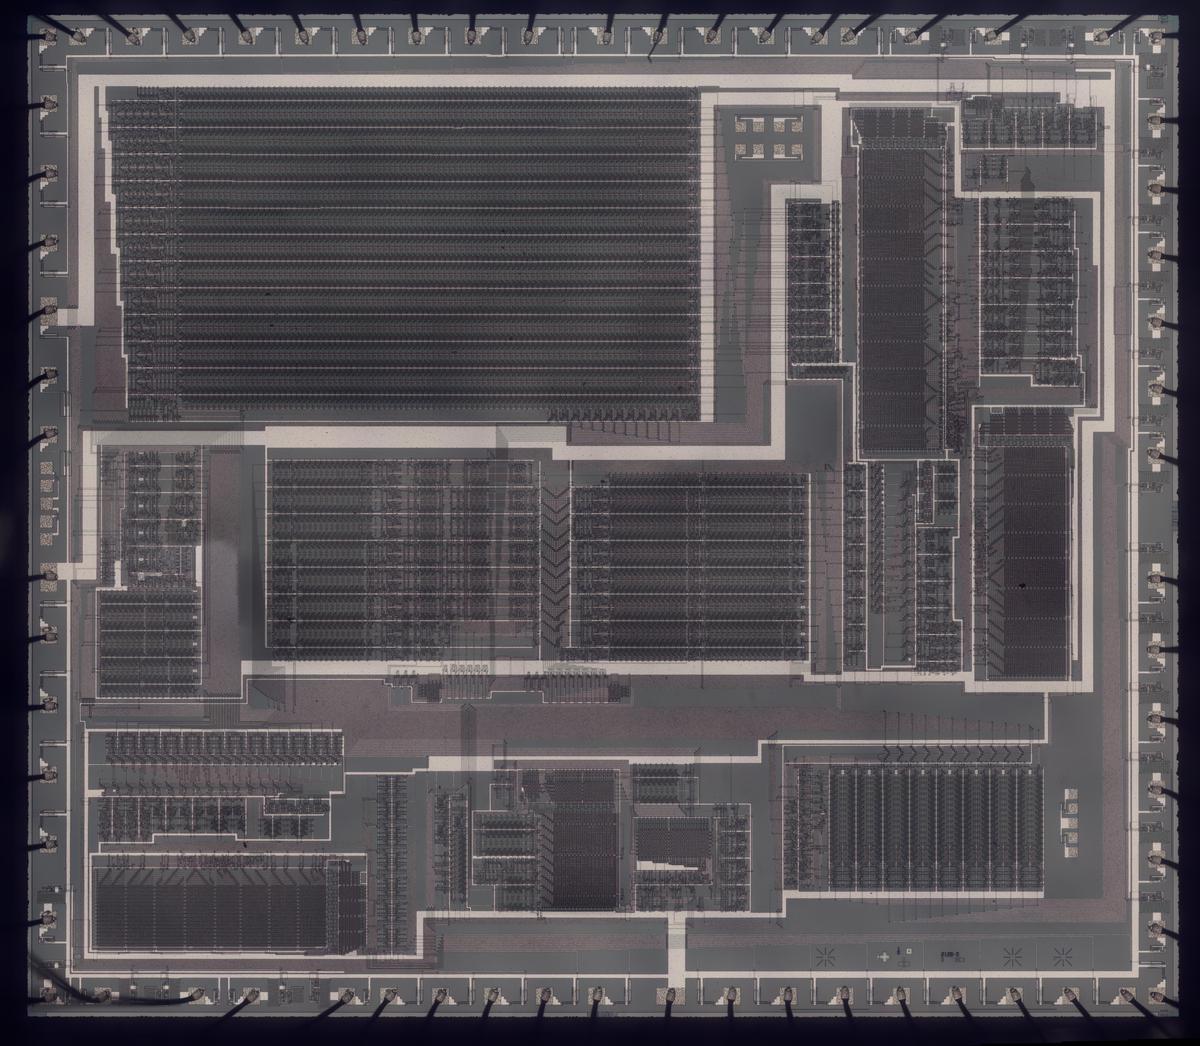 Die photo of the DX7's YM21280 Operator chip. Click this photo (or any other) for a magnified version.